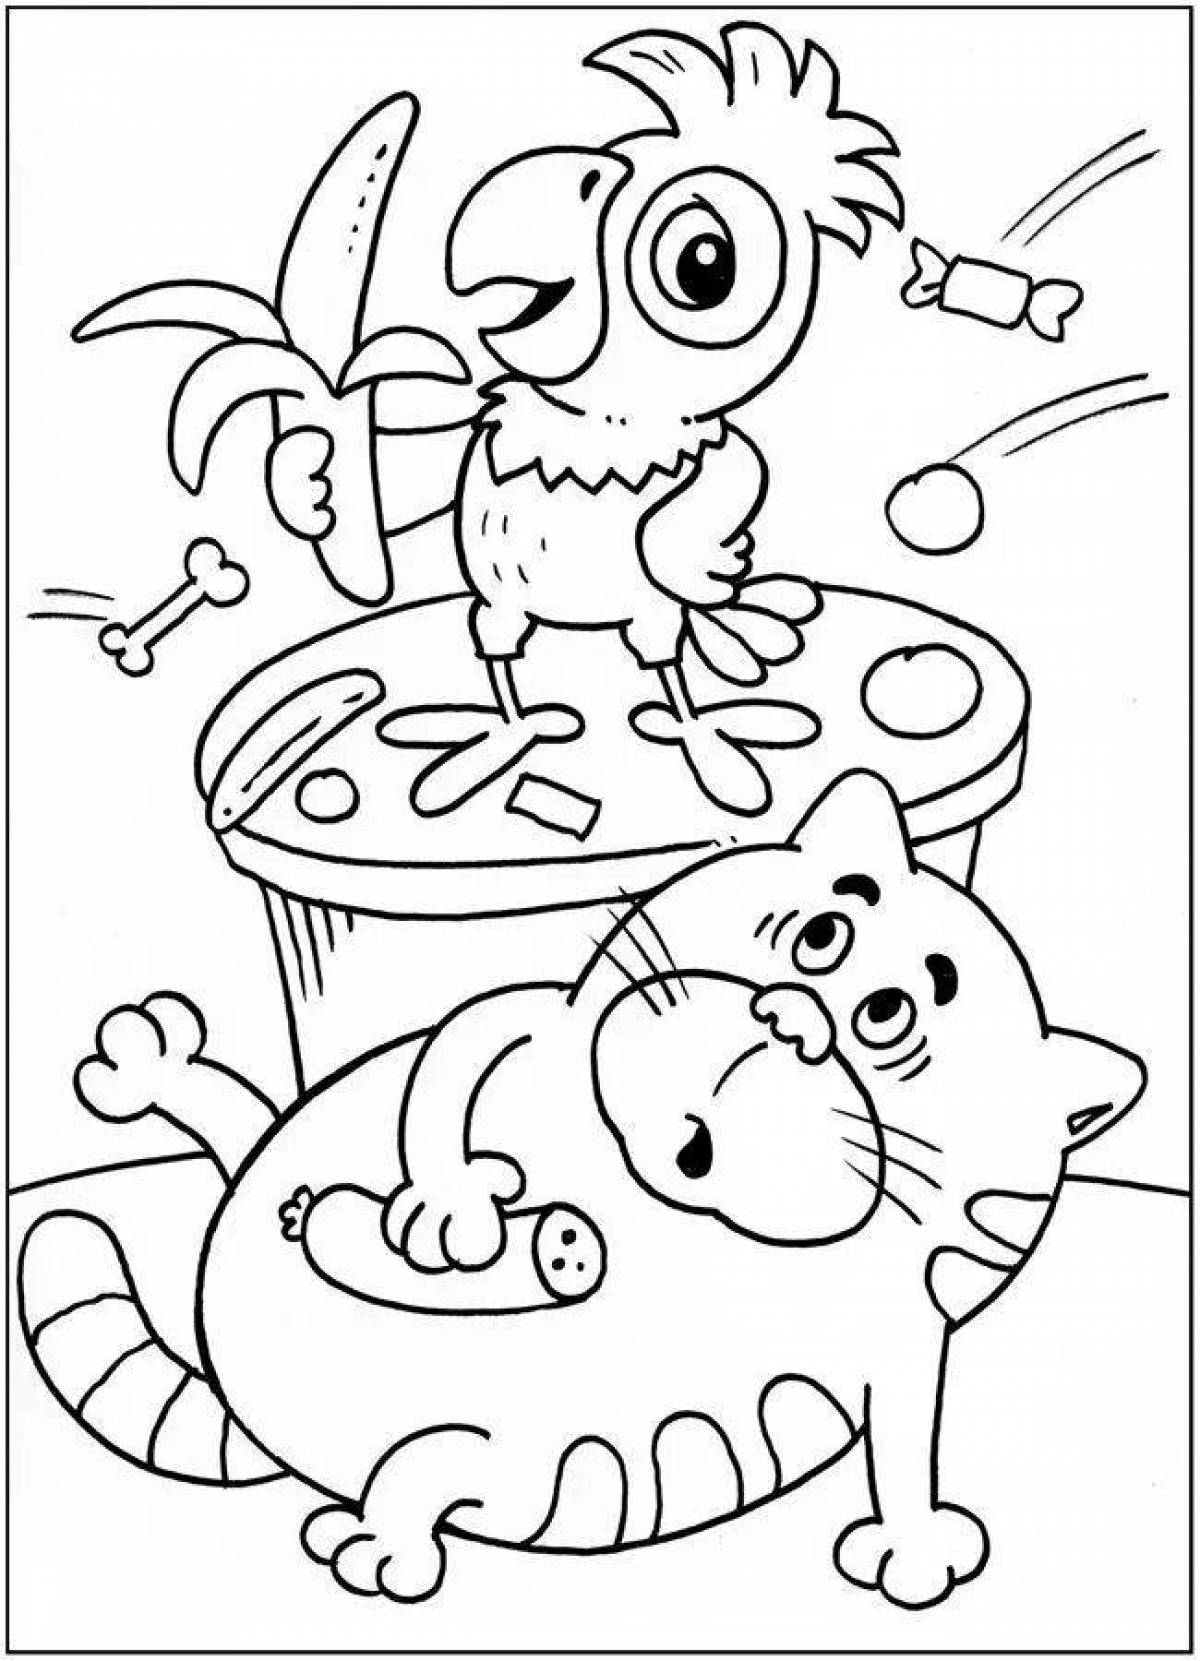 A selection of bright coloring pages